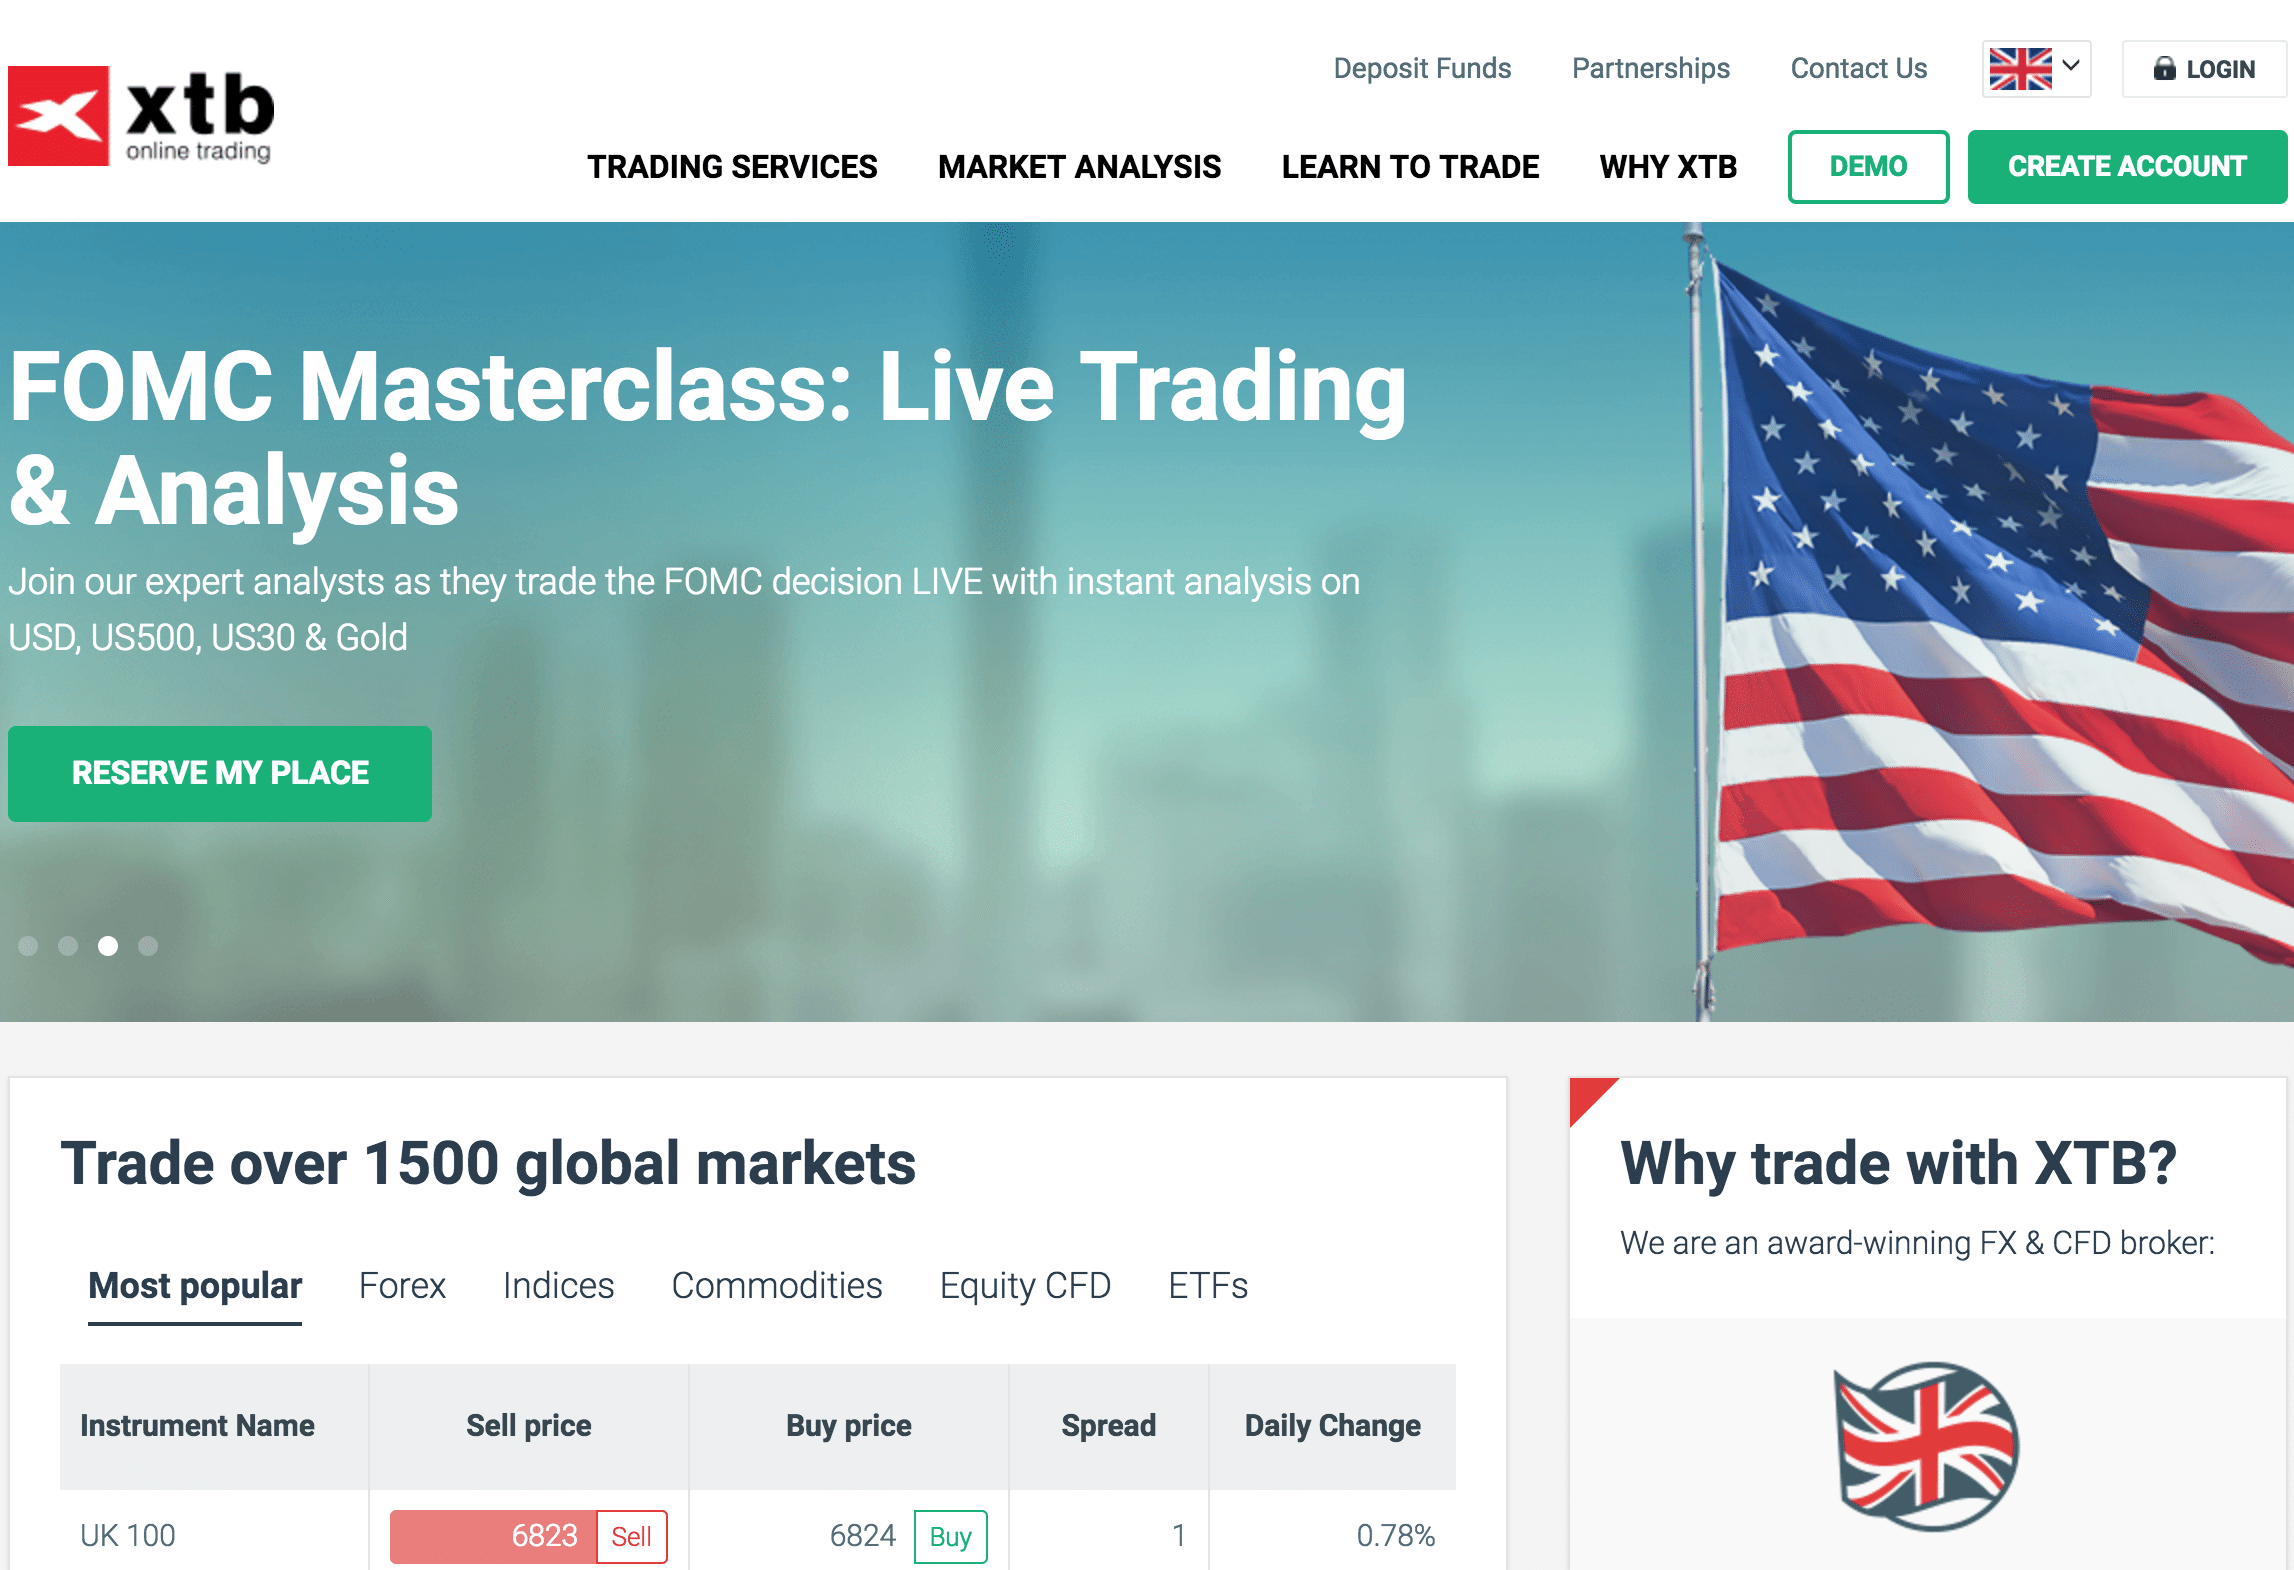 XTB Website Home Page